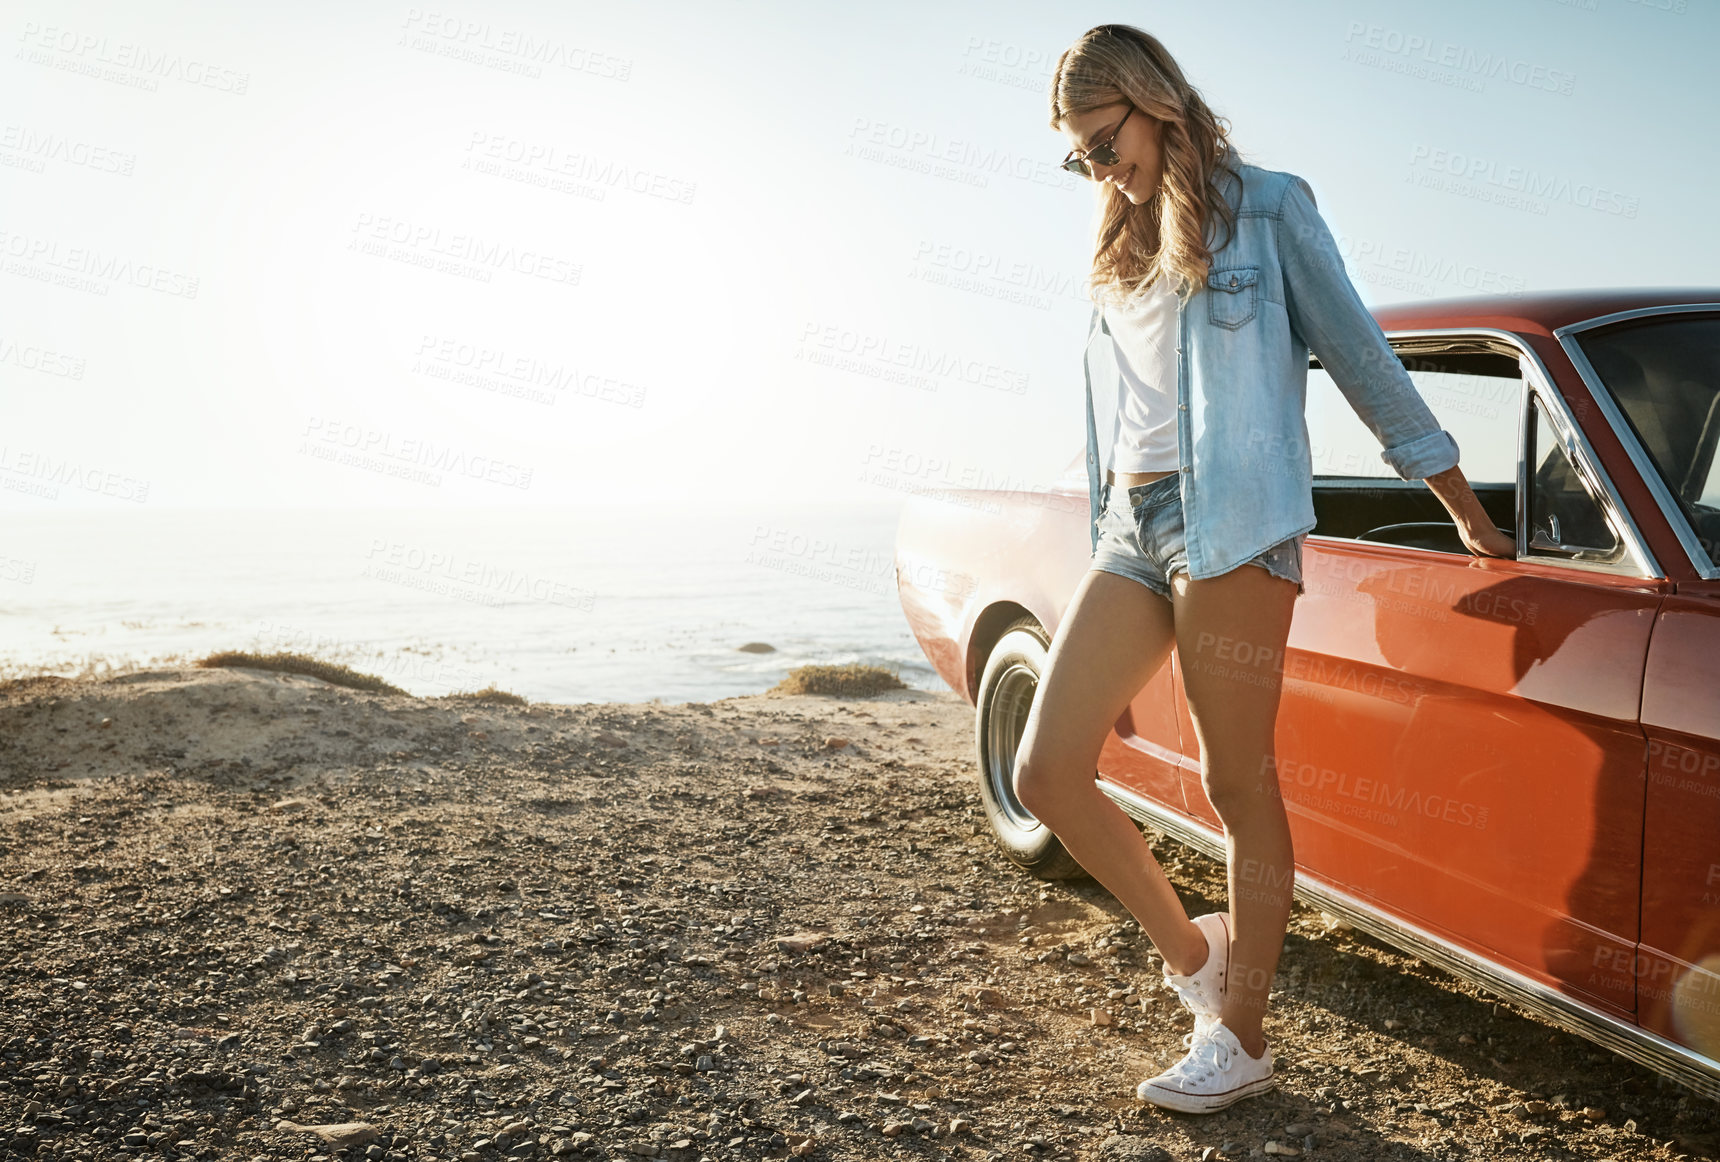 Buy stock photo Shot of a beautiful young woman going on a road trip to the beach